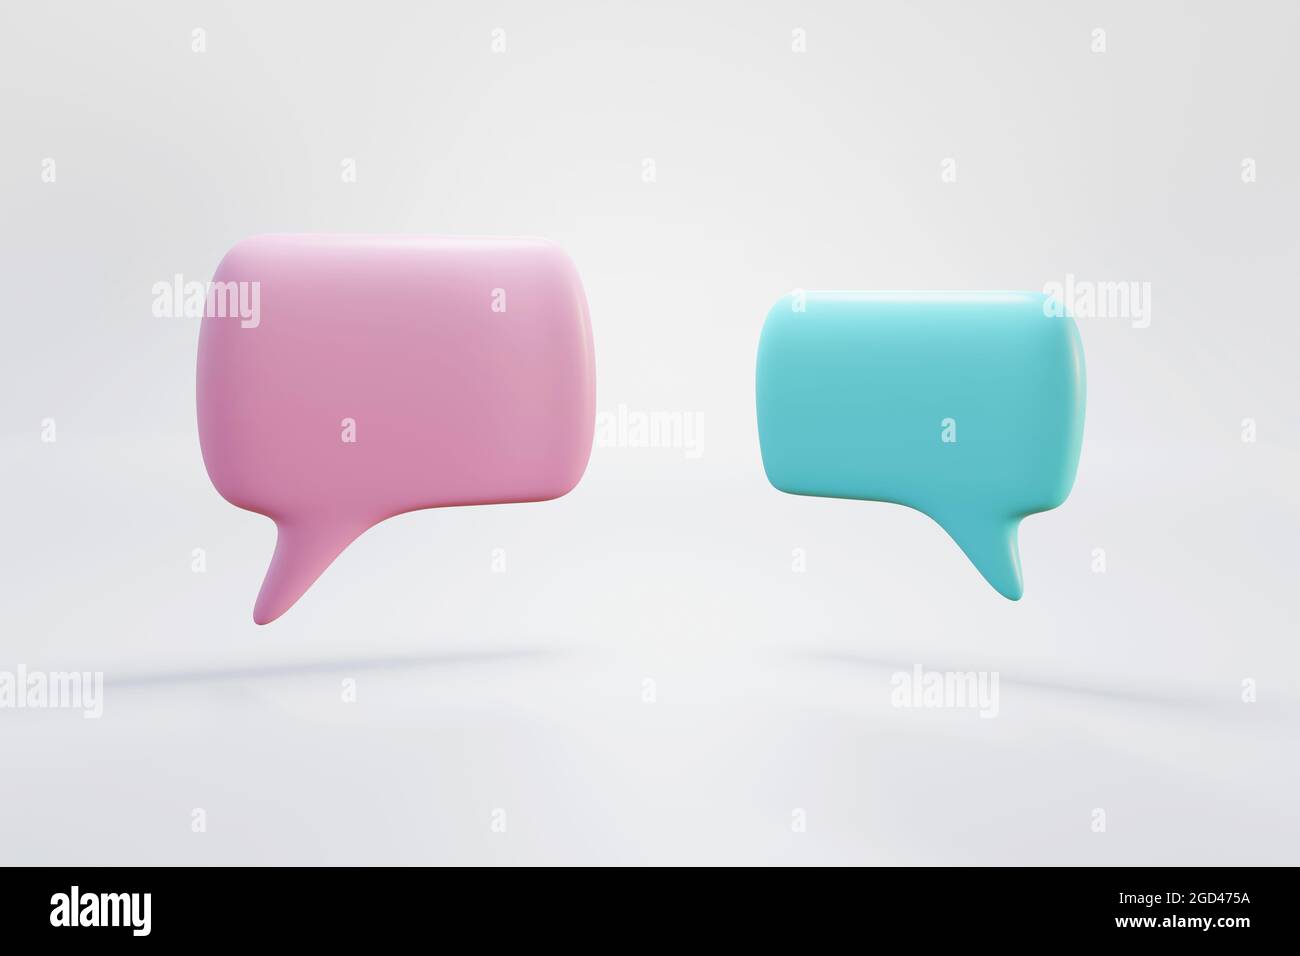 Pink and blue colored dialog bubble isolated on white background. 3D illustration.  Stock Photo